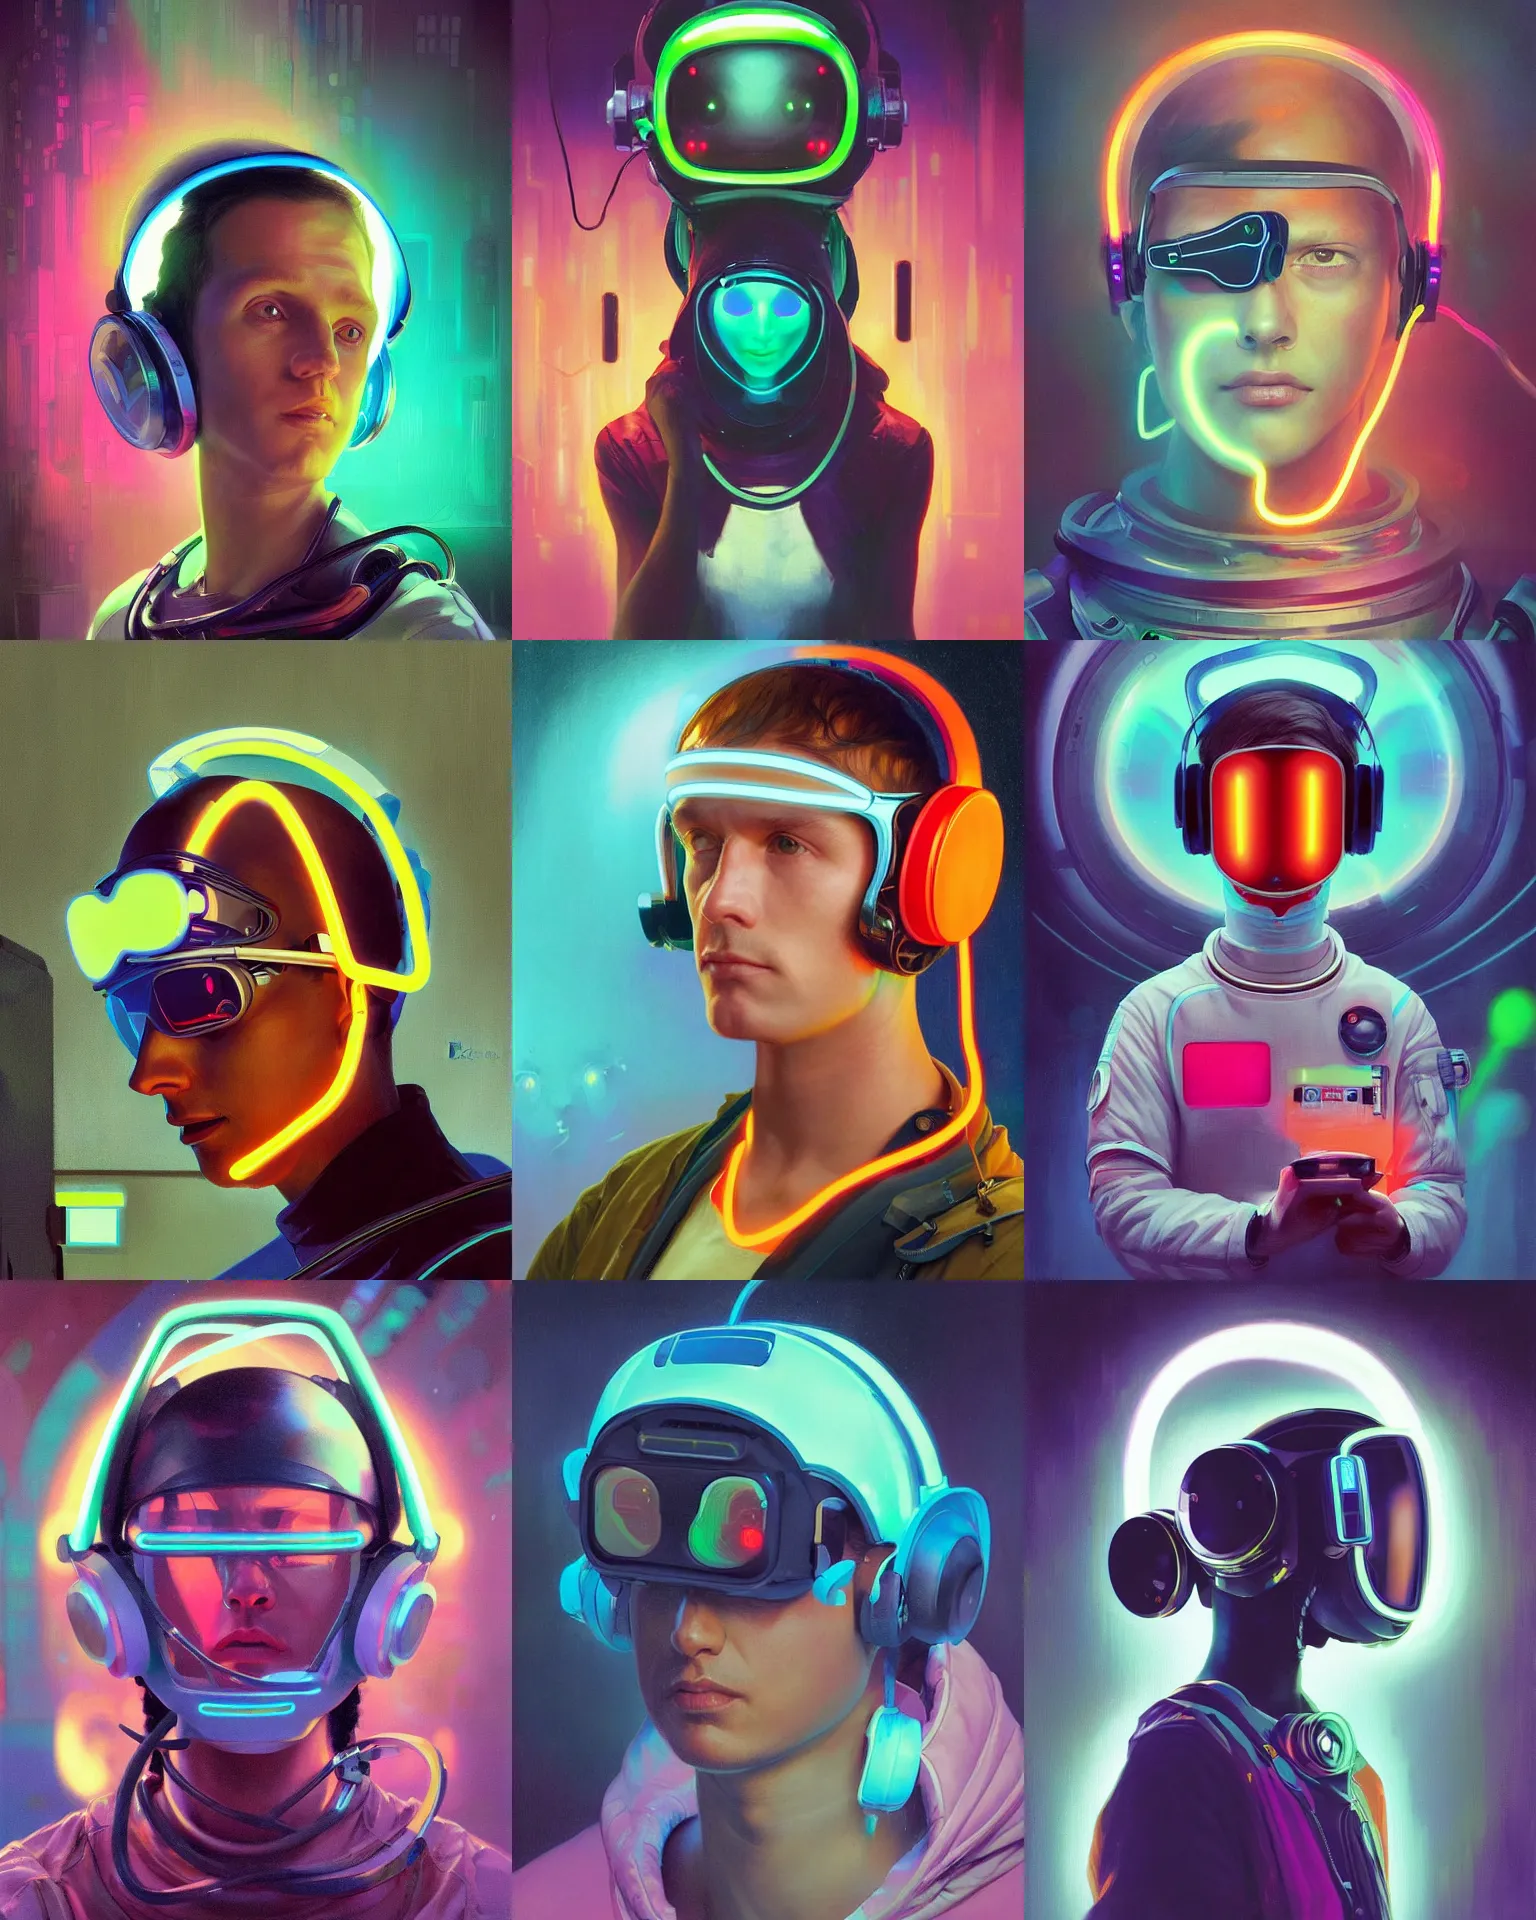 future coder looking on, eye visor and sleek neon | Stable Diffusion ...